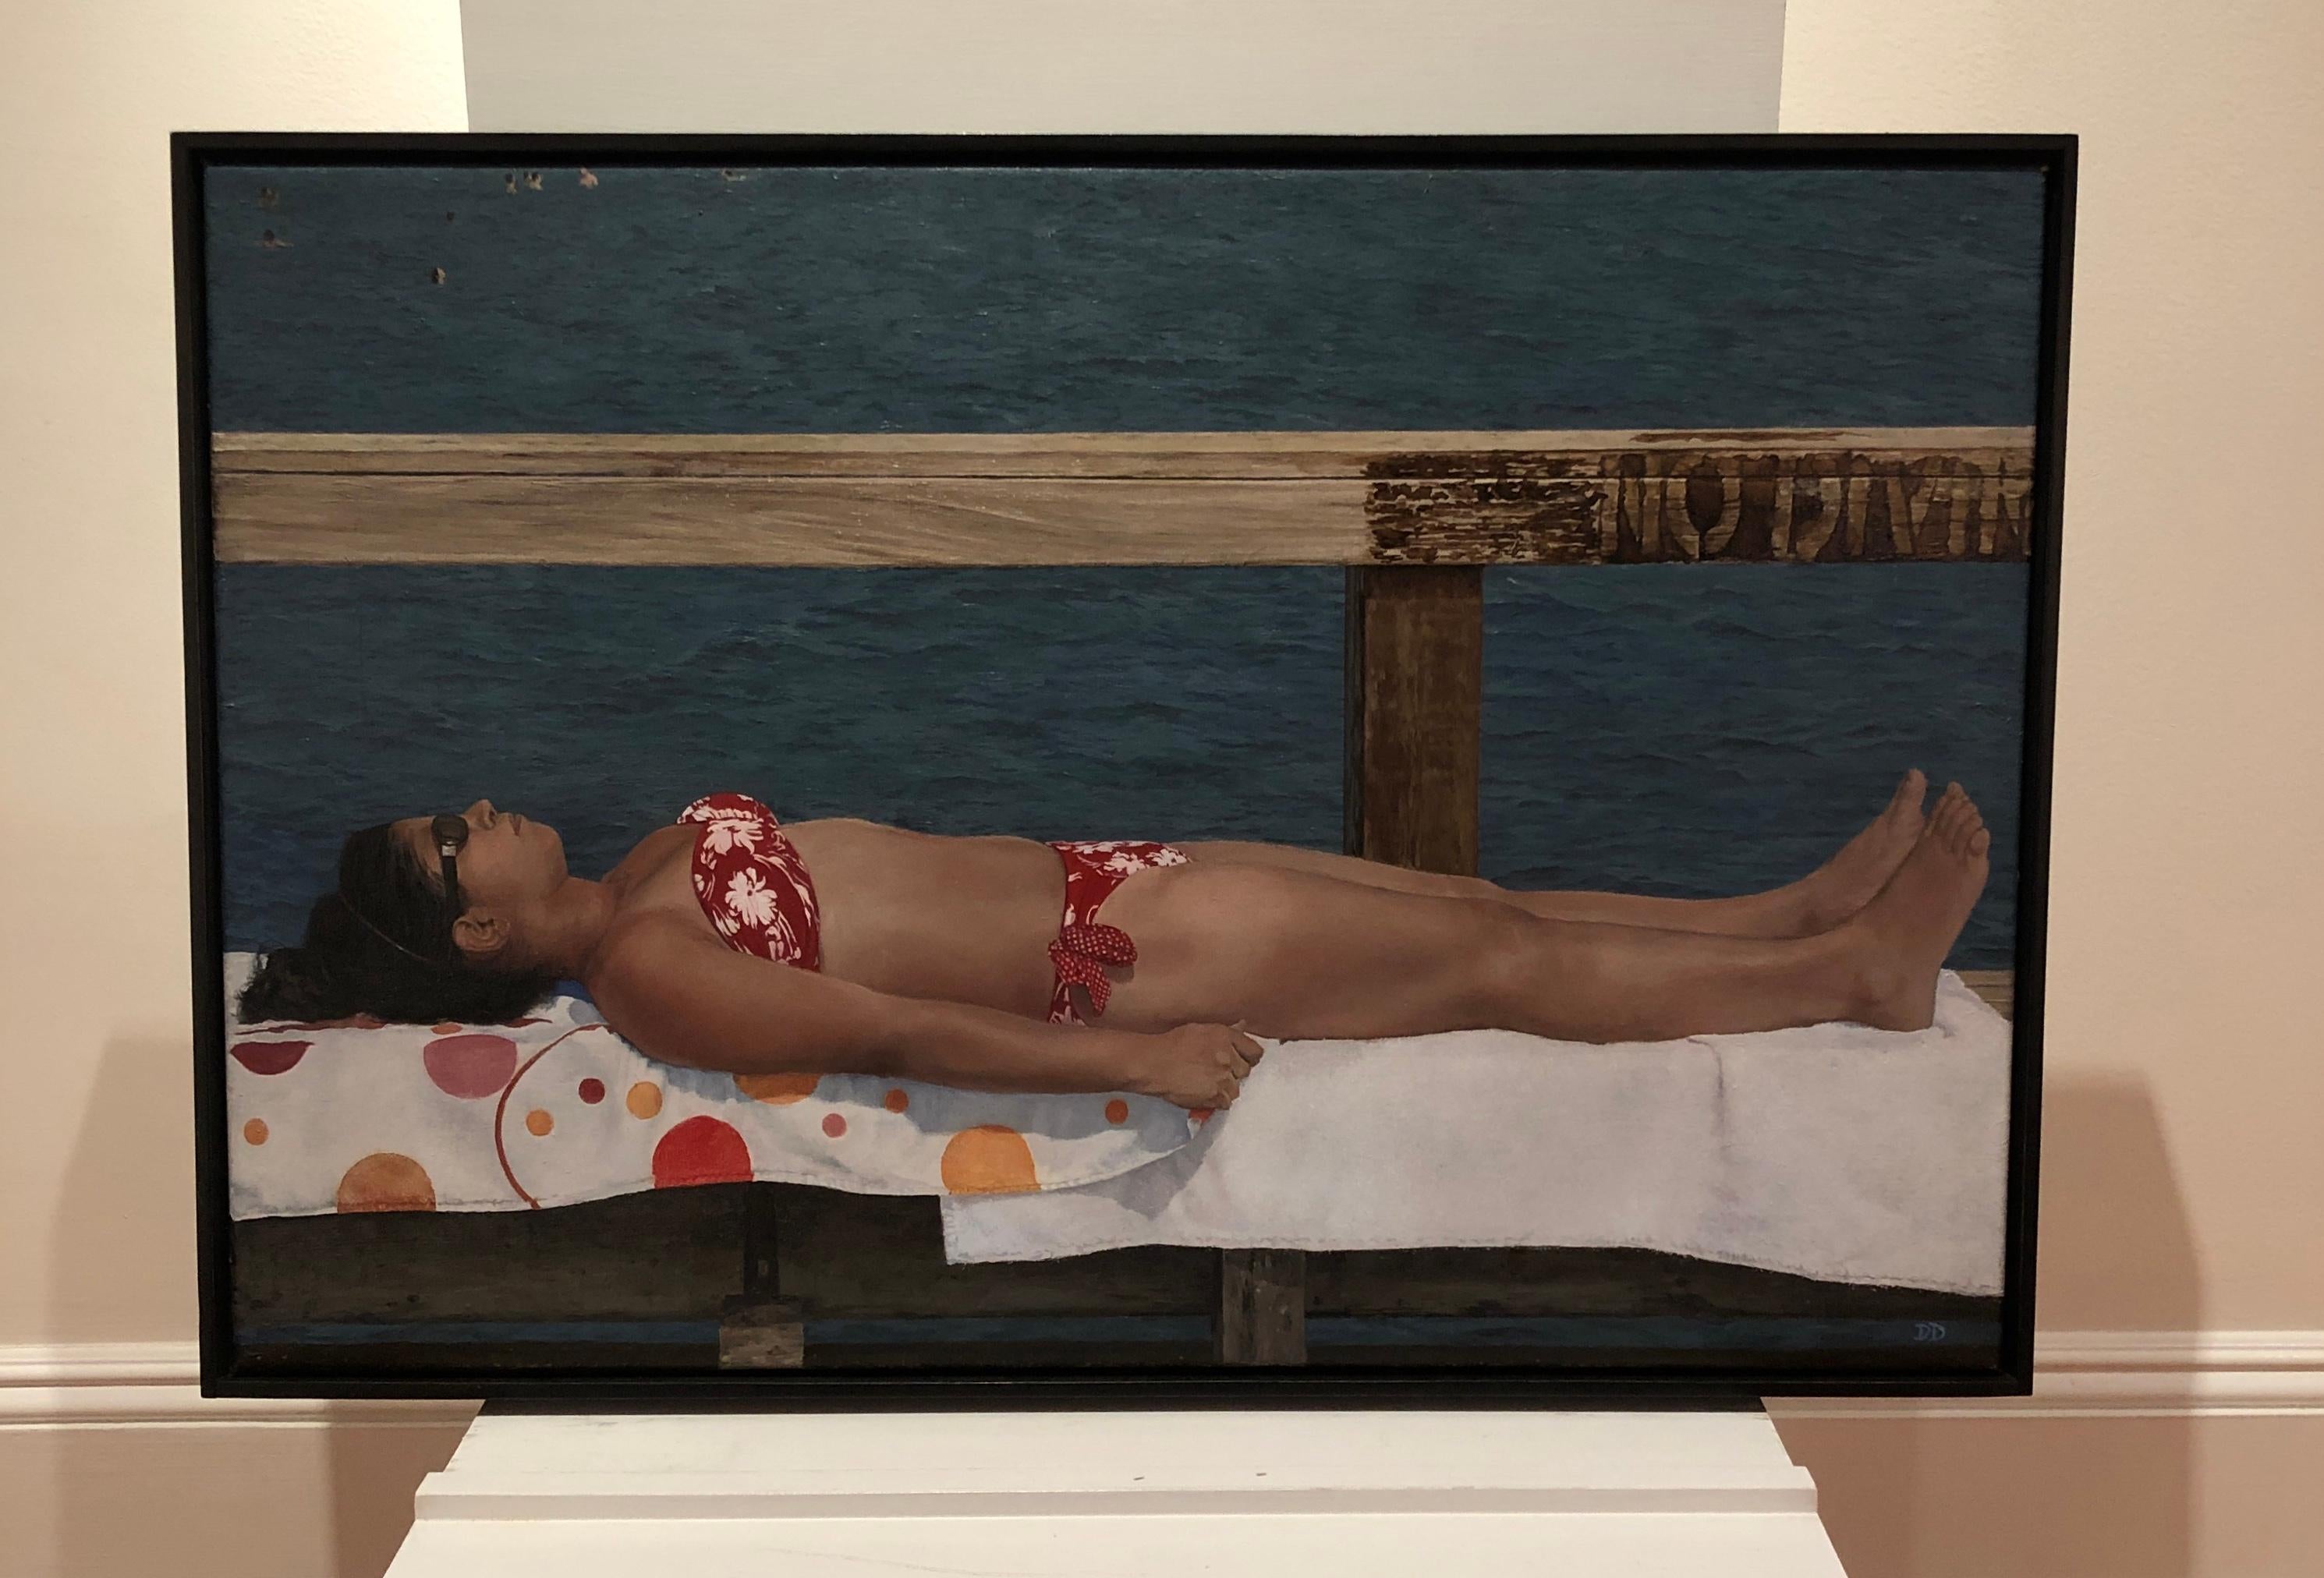 Contemporary realist painting of young woman in a bikini lying on a dock by NY based artist David Desimone. FRAMED dimensions are 21 x 31 inches, black floater frame.
DeSimone paints in oil on canvas, focusing primarily on landscapes depicting